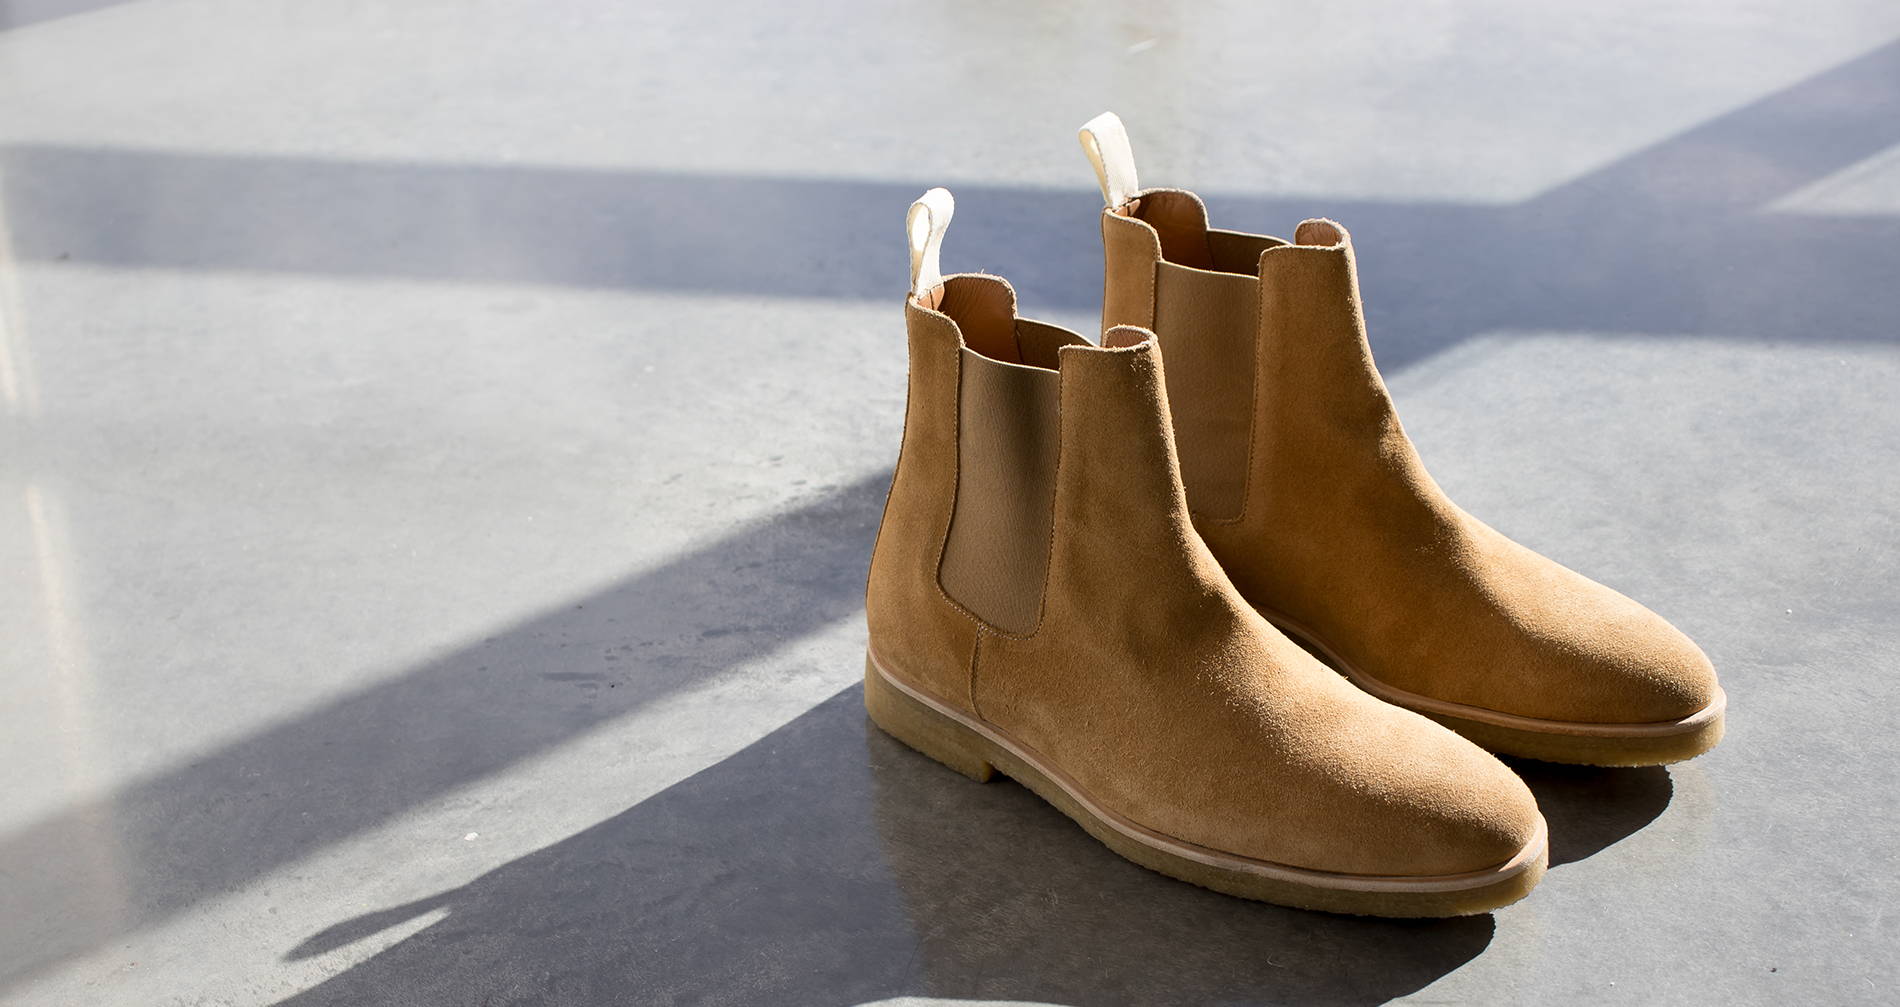 Angreb tale Opgive Chelsea Boots: What Makes Them Popular? - Oliver Cabell